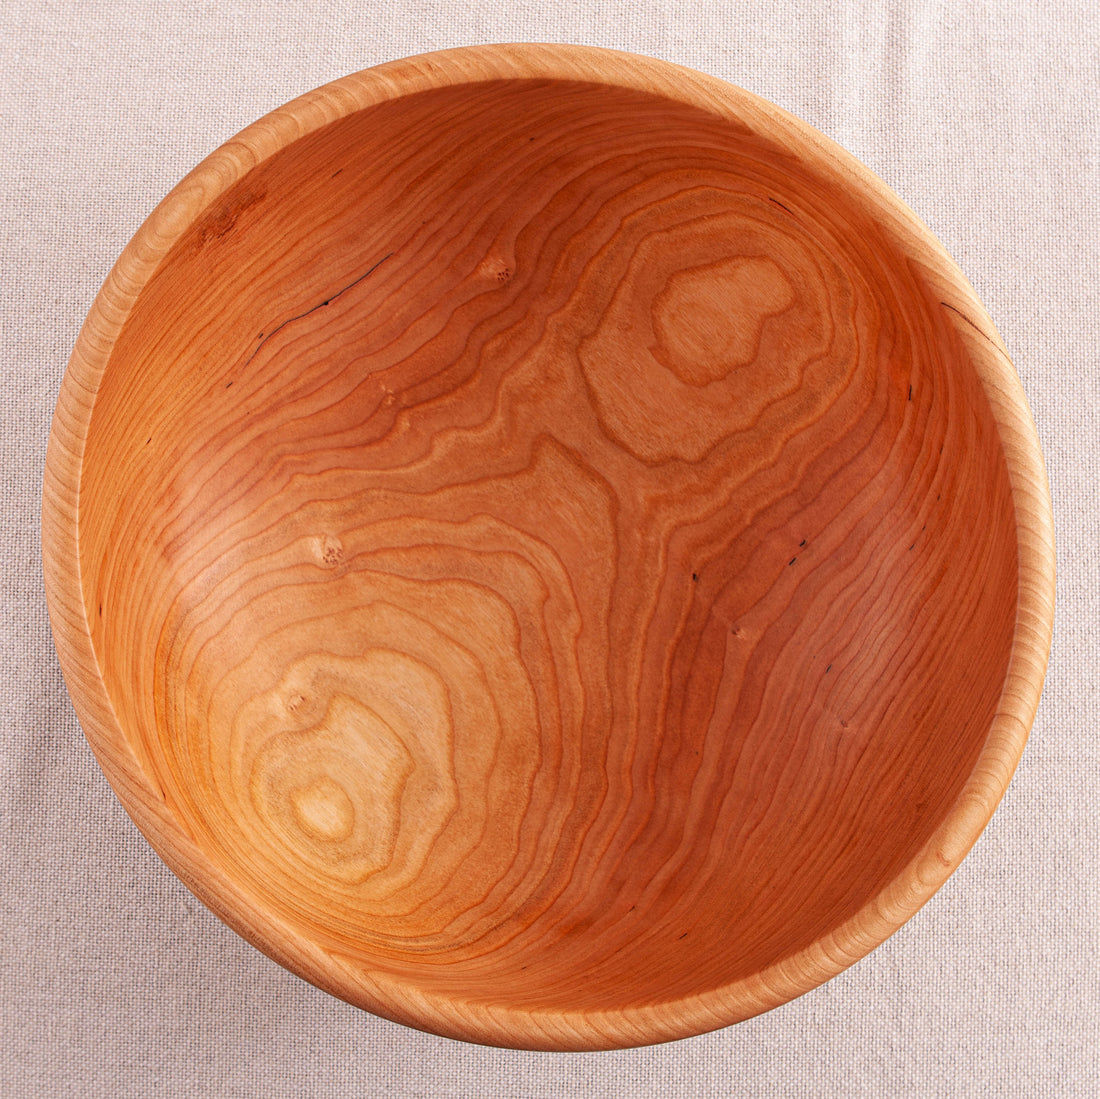 HIVE BOWL IN CHERRY 13"x 5"